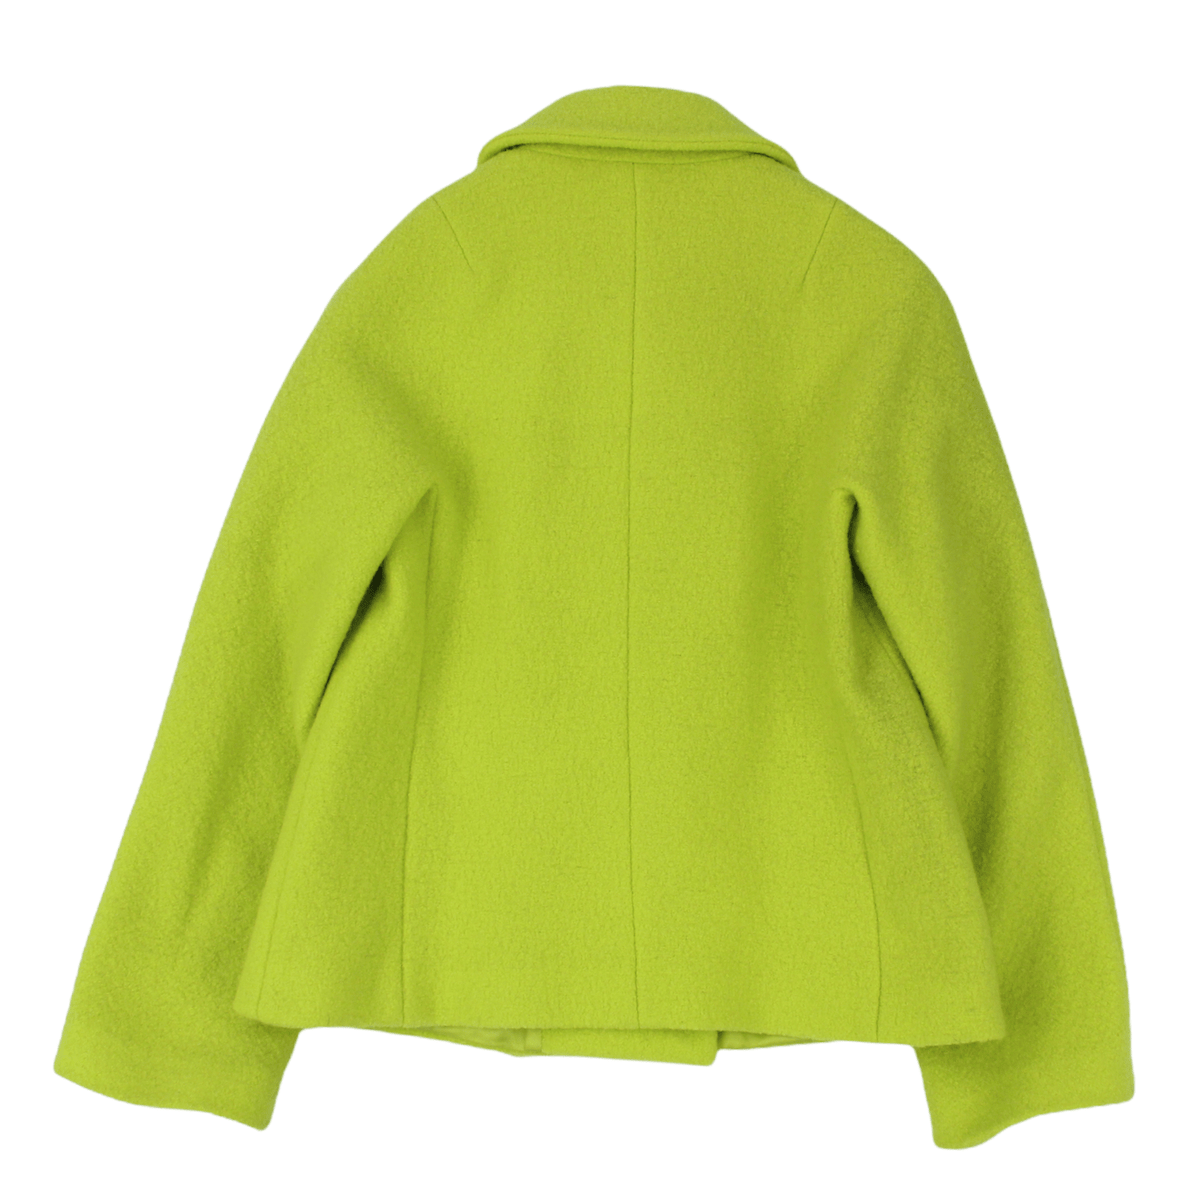 LK Bennett Lime Green Doubled Breasted Wool jacket